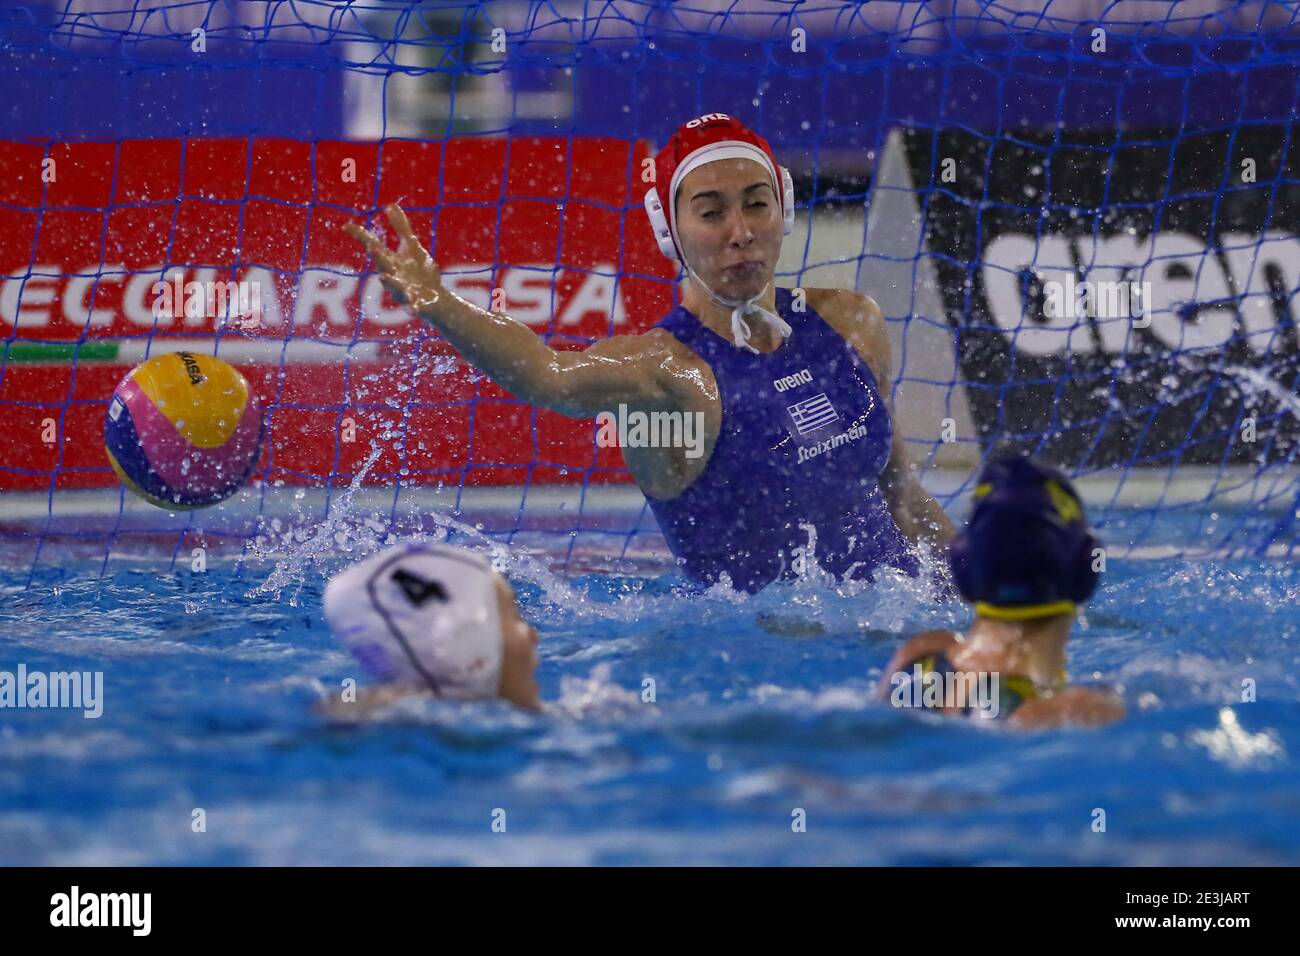 TRIESTE, ITALY - JANUARY 19: Nikoleta Eleftheriadou of Greece, Chrysoula Diamantopoulou of Greece, Anna Turova of Kazakhstan during the match between Greece and Kazakhstan at Women's Water Polo Olympic Games Qualification Tournament at Bruno Bianchi Aquatic Center on January 19, 2021 in Trieste, Italy (Photo by Marcel ter Bals/Orange Pictures/Alamy Live News) Stock Photo